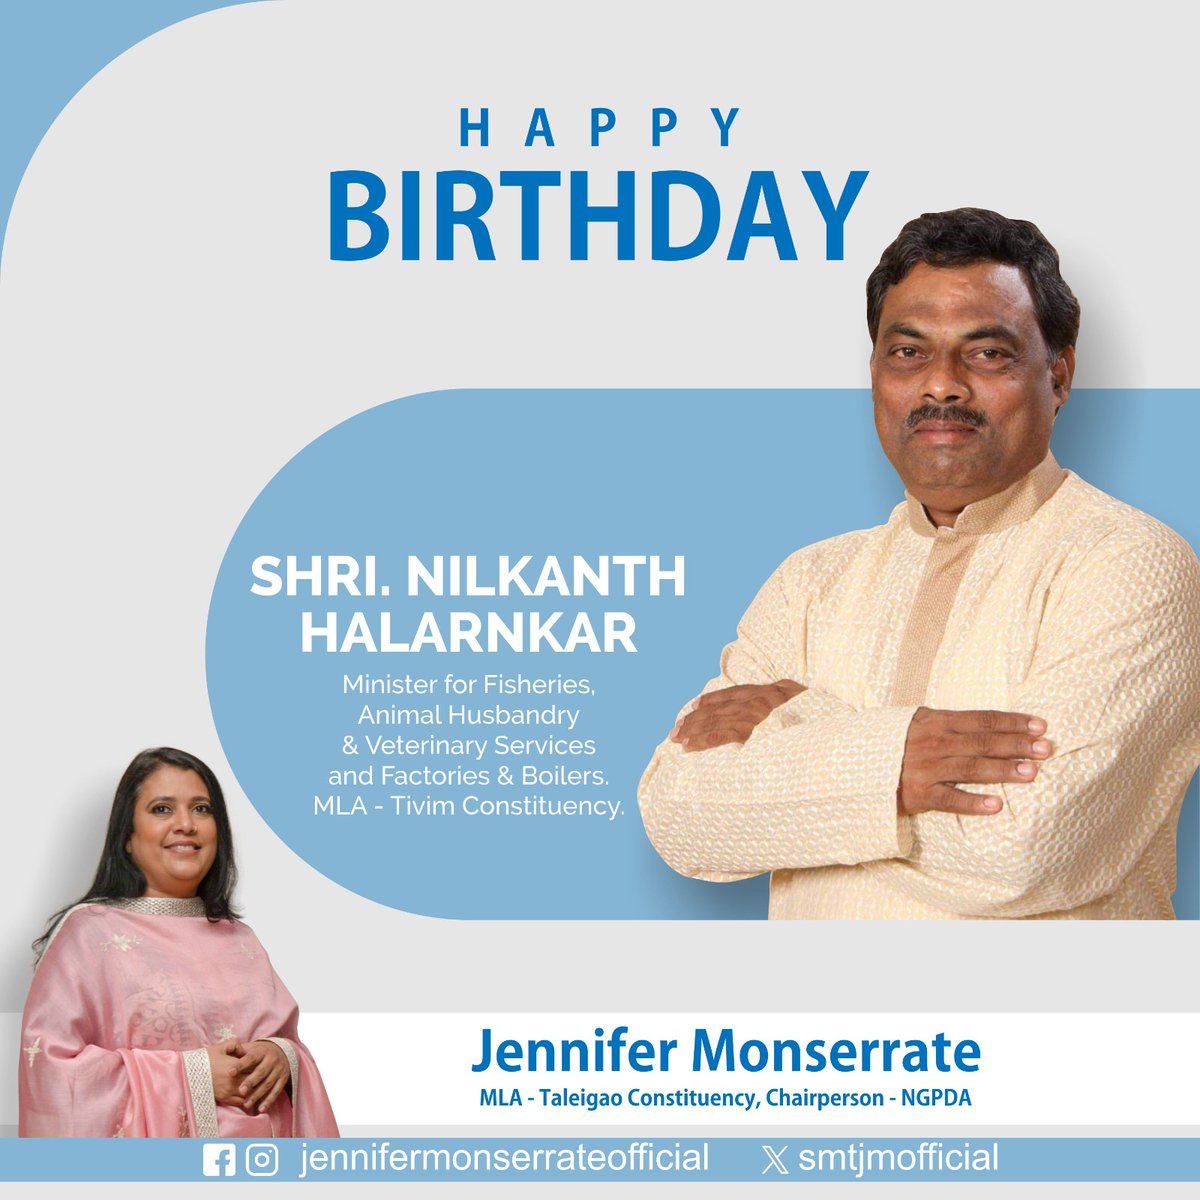 Warmest birthday wishes to Shri. @NilkantHalarnk1, Cabinet Minister for Fisheries, Animal Husband & Veterinary Services, Factories & Boilers and MLA - Tivim Constituency. Wishing you good health, a joyous celebration and a prosperous year ahead.